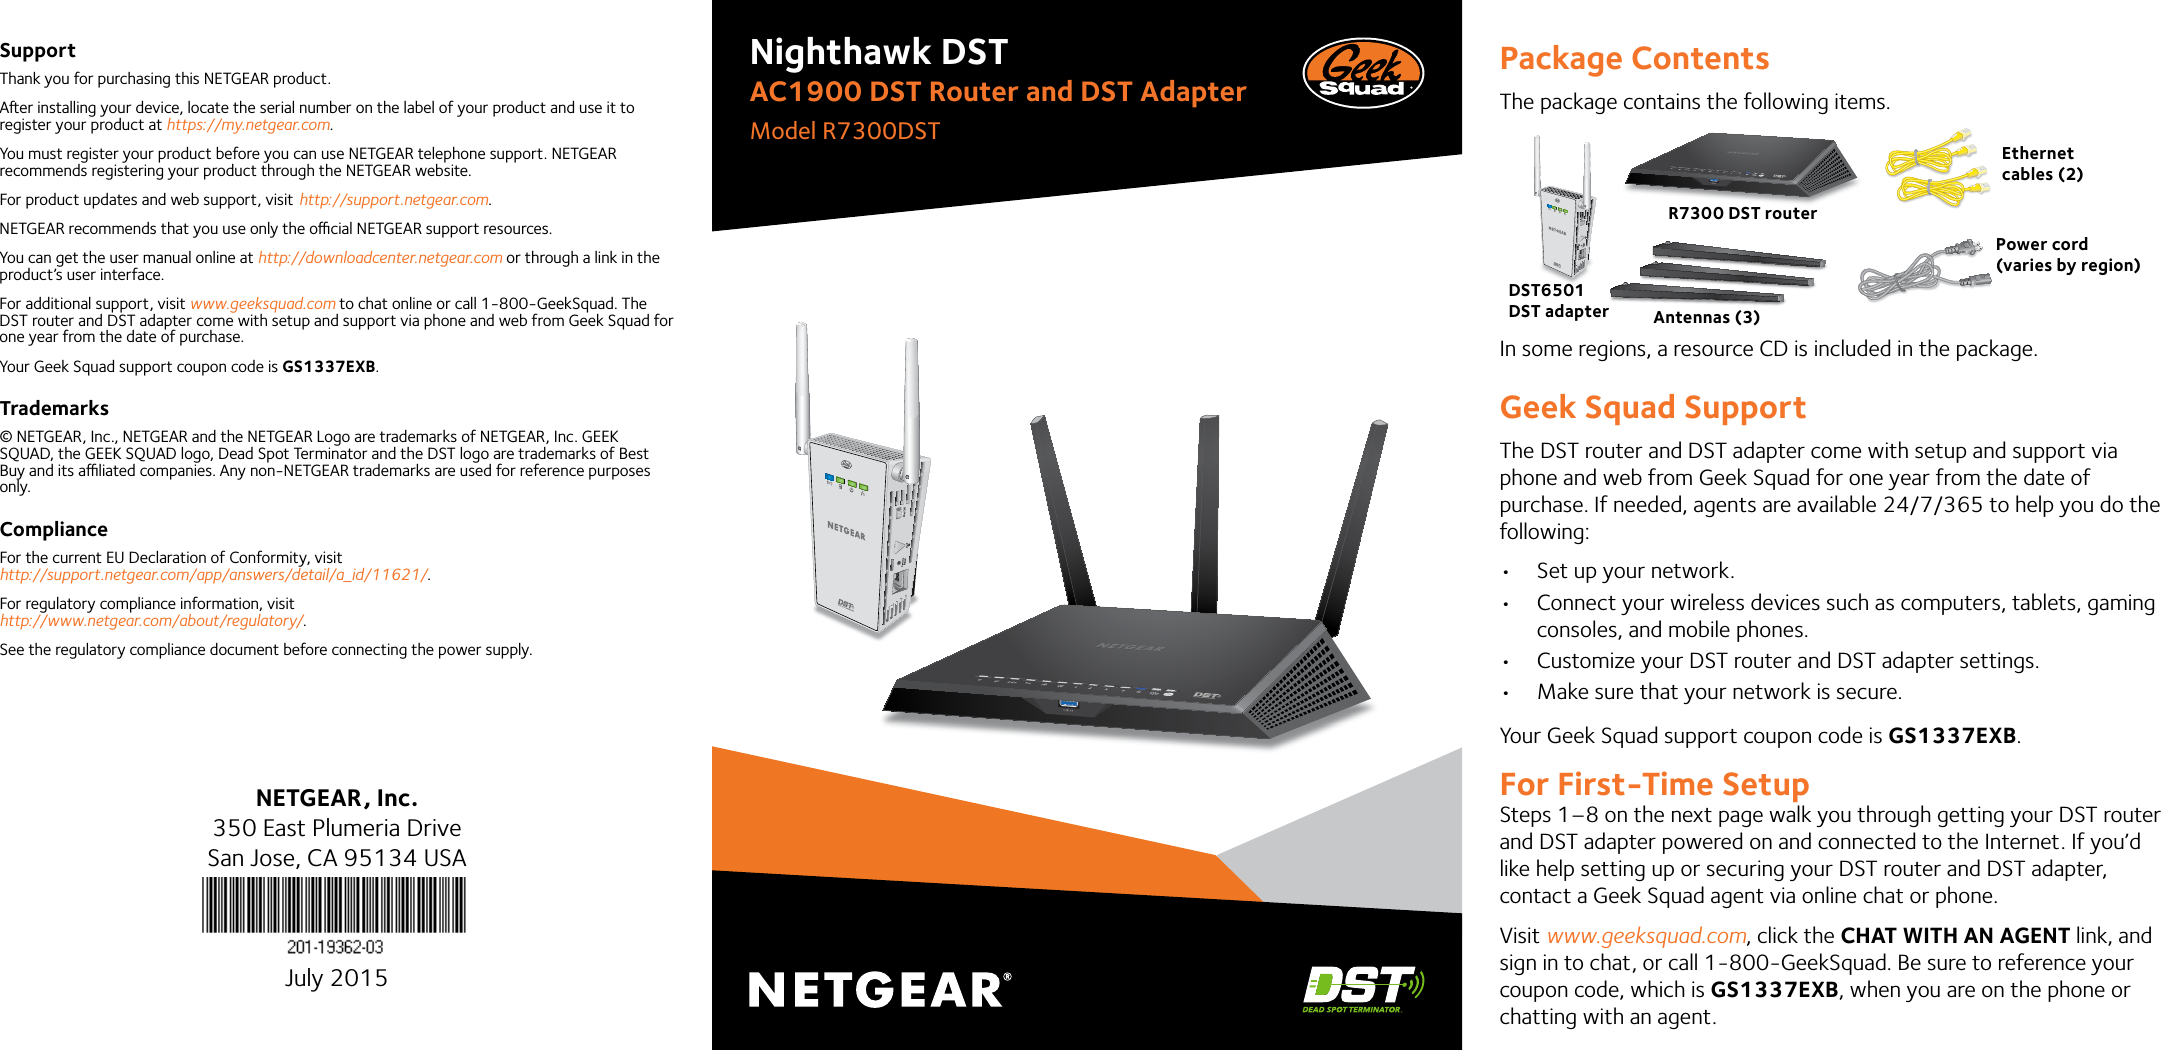 Package ContentsThe package contains the following items.In some regions, a resource CD is included in the package.Geek Squad SupportThe DST router and DST adapter come with setup and support via phone and web from Geek Squad for one year from the date of purchase. If needed, agents are available 24/7/365 to help you do the following: • Set up your network.• Connect your wireless devices such as computers, tablets, gaming consoles, and mobile phones.• Customize your DST router and DST adapter settings.• Make sure that your network is secure.Your Geek Squad support coupon code is GS1337EXB.For First-Time SetupSteps 1–8 on the next page walk you through getting your DST router and DST adapter powered on and connected to the Internet. If you’d like help setting up or securing your DST router and DST adapter, contact a Geek Squad agent via online chat or phone. Visit www.geeksquad.com, click the CHAT WITH AN AGENT link, and sign in to chat, or call 1-800-GeekSquad. Be sure to reference your coupon code, which is GS1337EXB, when you are on the phone or chatting with an agent.Nighthawk DSTAC1900 DST Router and DST AdapterModel R7300DSTSupportThank you for purchasing this NETGEAR product.Aer installing your device, locate the serial number on the label of your product and use it to register your product at https://my.netgear.com. You must register your product before you can use NETGEAR telephone support. NETGEAR recommends registering your product through the NETGEAR website.For product updates and web support, visit http://support.netgear.com.NETGEAR recommends that you use only the ocial NETGEAR support resources. You can get the user manual online at http://downloadcenter.netgear.com or through a link in the product’s user interface.For additional support, visit www.geeksquad.com to chat online or call 1-800-GeekSquad. The DST router and DST adapter come with setup and support via phone and web from Geek Squad for one year from the date of purchase.Your Geek Squad support coupon code is GS1337EXB.Trademarks© NETGEAR, Inc., NETGEAR and the NETGEAR Logo are trademarks of NETGEAR, Inc. GEEK SQUAD, the GEEK SQUAD logo, Dead Spot Terminator and the DST logo are trademarks of Best Buy and its aliated companies. Any non-NETGEAR trademarks are used for reference purposes only.ComplianceFor the current EU Declaration of Conformity, visit http://support.netgear.com/app/answers/detail/a_id/11621/. For regulatory compliance information, visit http://www.netgear.com/about/regulatory/.See the regulatory compliance document before connecting the power supply.NETGEAR, Inc.350 East Plumeria DriveSan Jose, CA 95134 USAJuly 2015R7300 DST routerEthernet cables (2) Power cord(varies by region)Antennas (3)DST6501 DST adapter